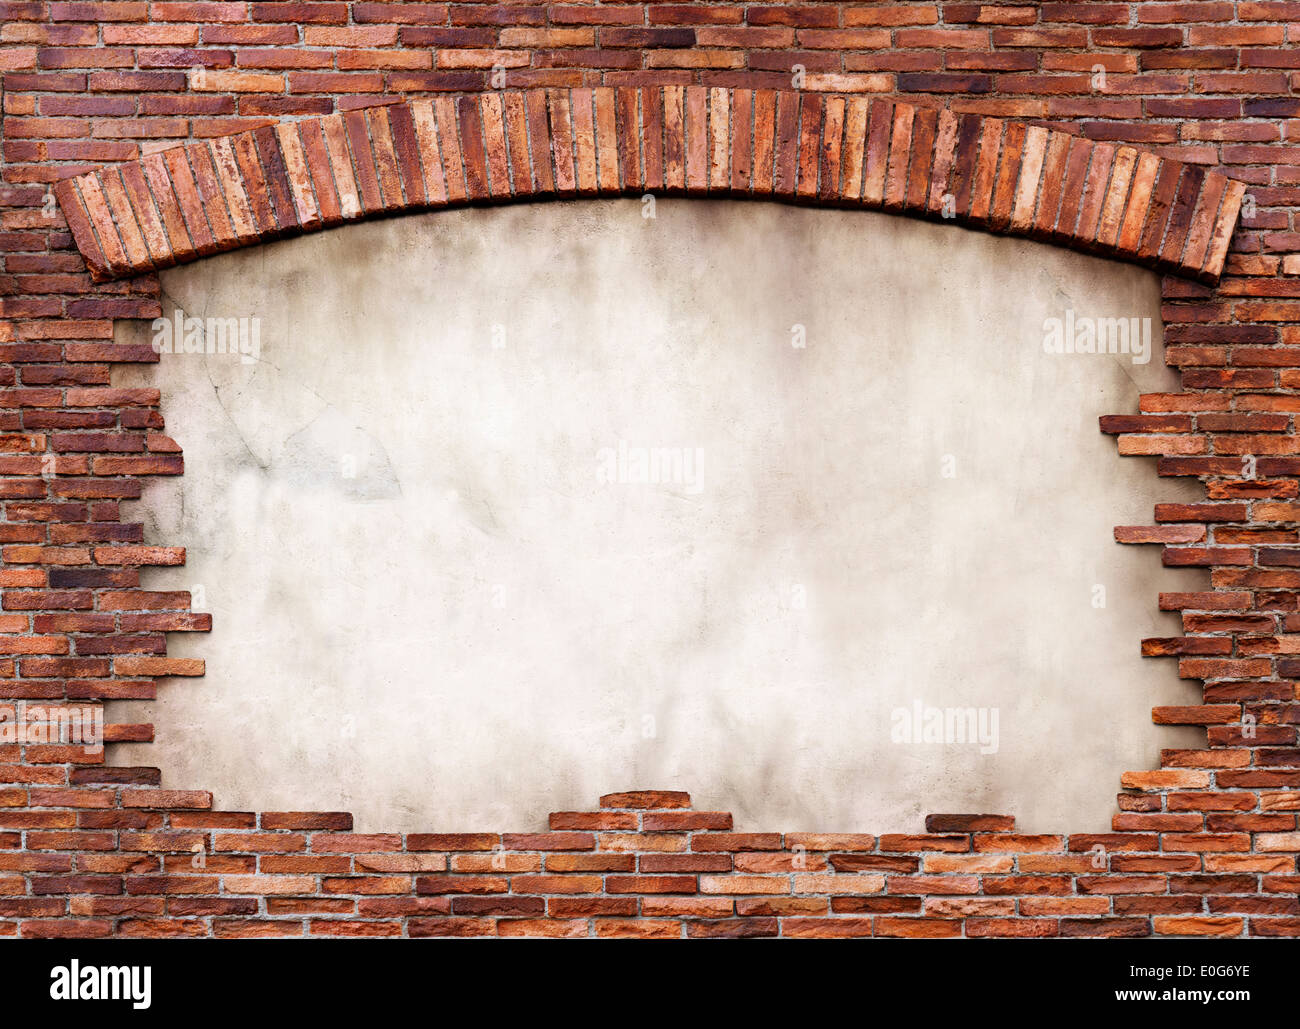 Stucco background framed with old red brick wall with an arch. Isolated with clipping path. Stock Photo